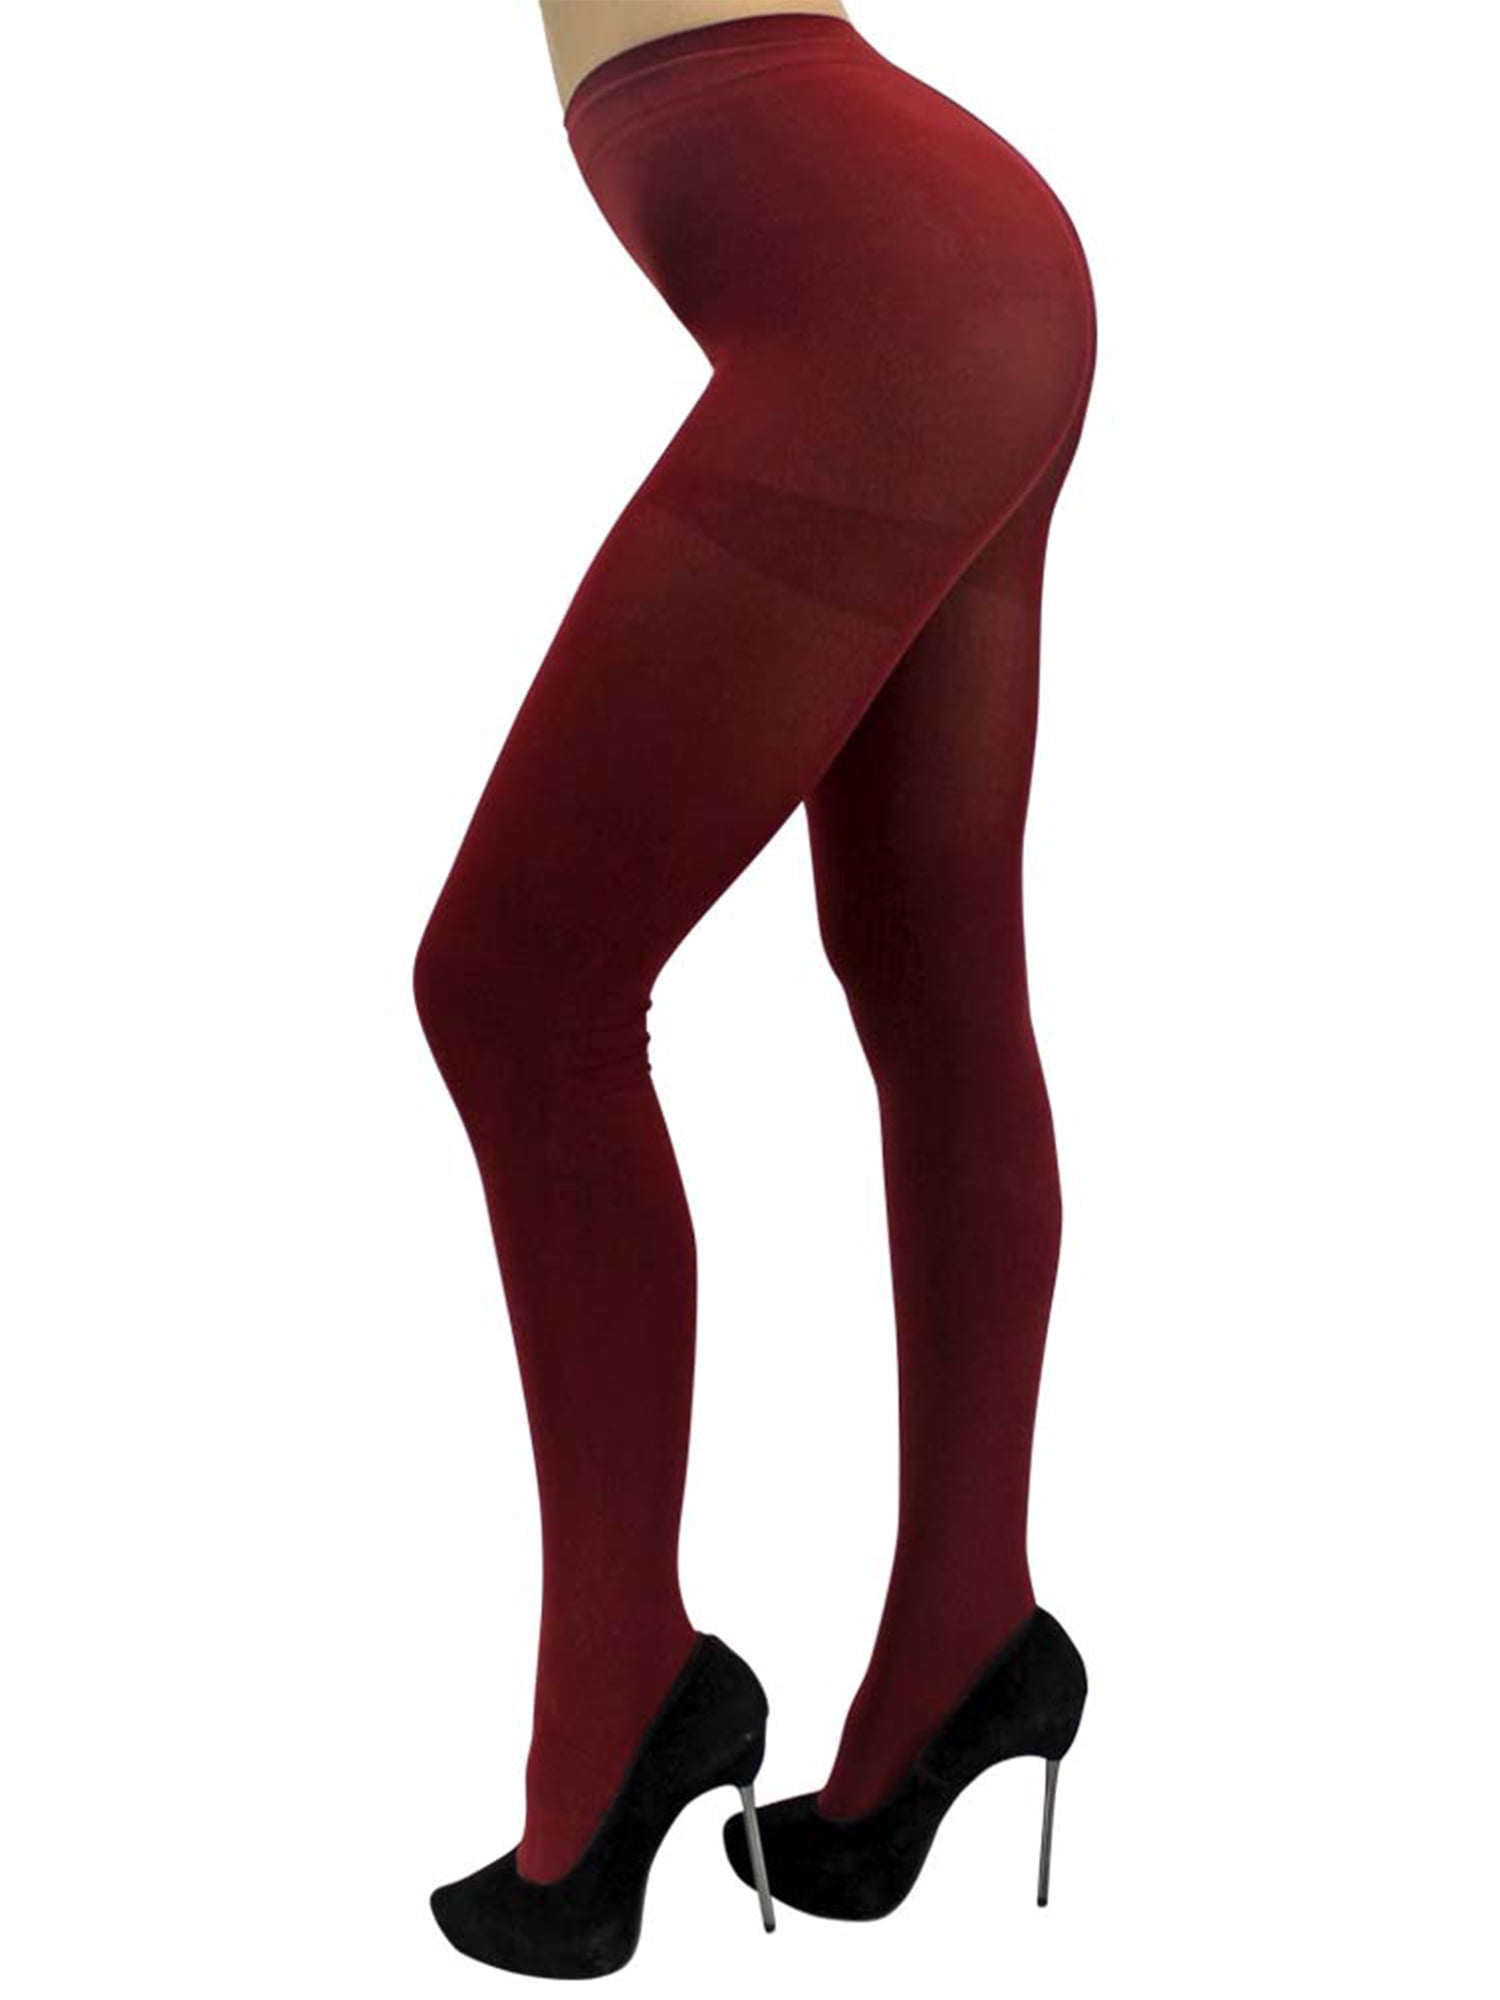 Burgundy Opaque Stretchy Pantyhose Tights 